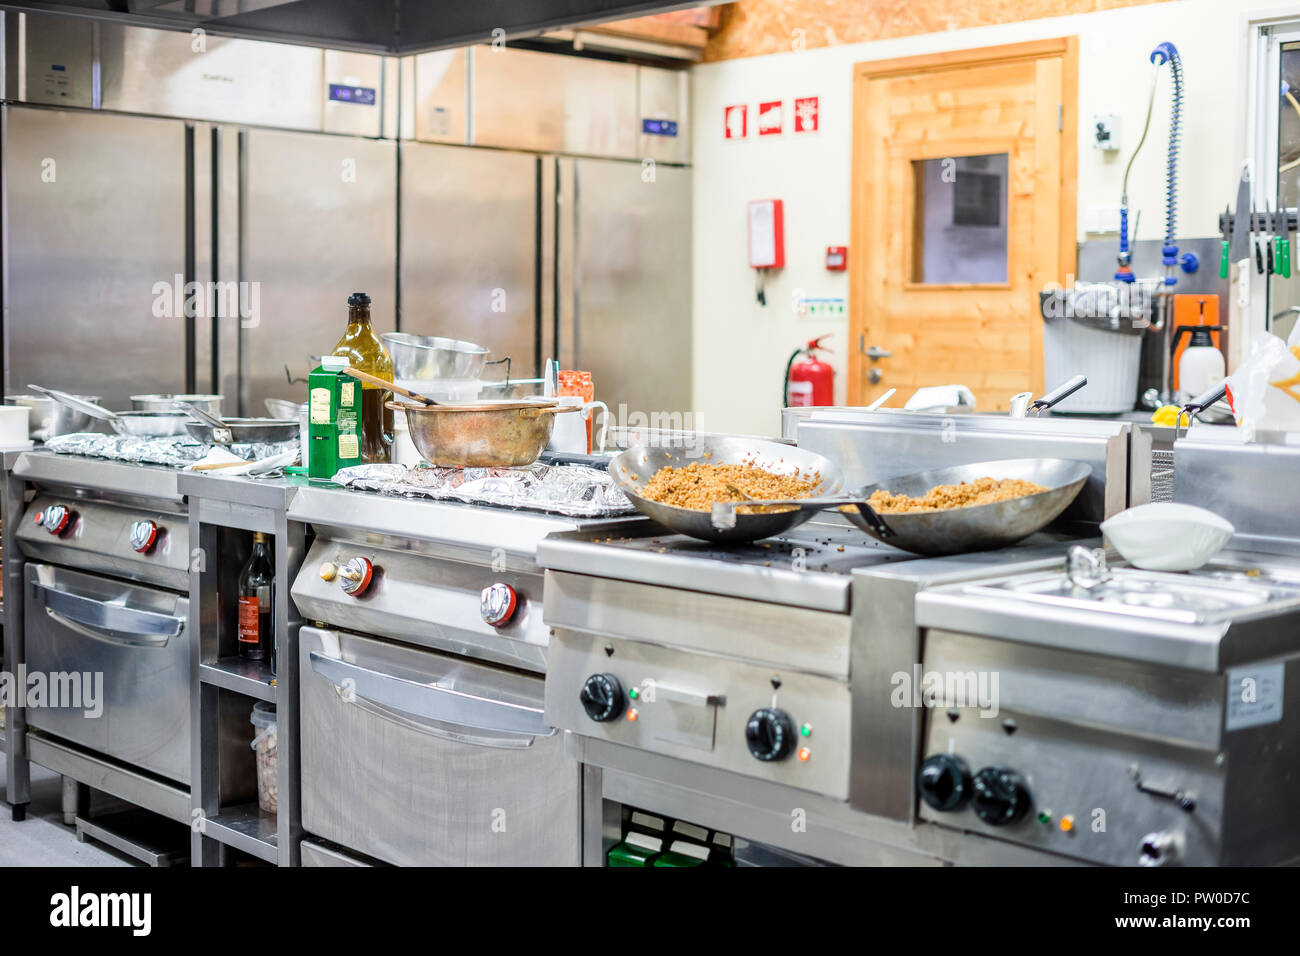 Kitchen's interior while preparing food during lunch time in the restaurant Stock Photo